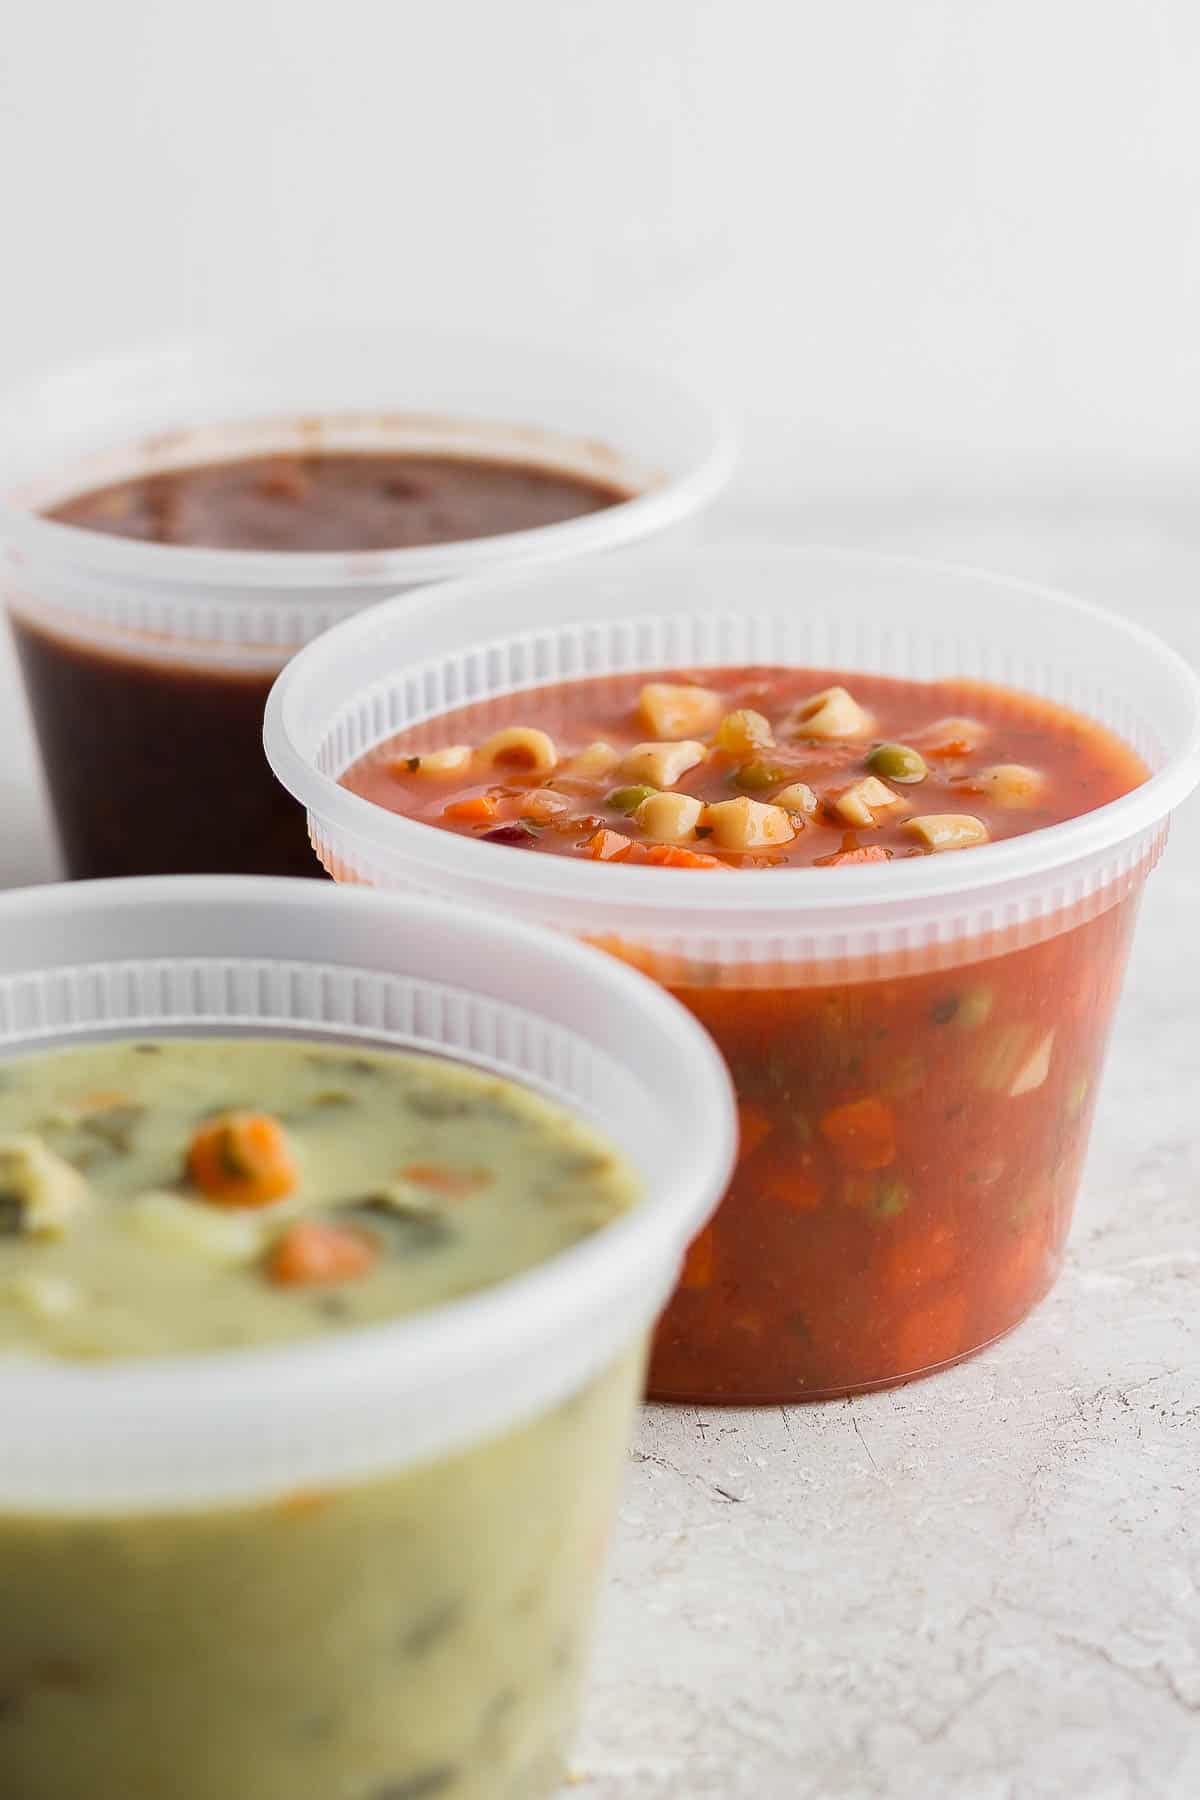 Three soup containers with the lids removed showing three different varieties of soup: a black bean soup, a minestrone soup, and a chicken gnocchi soup.